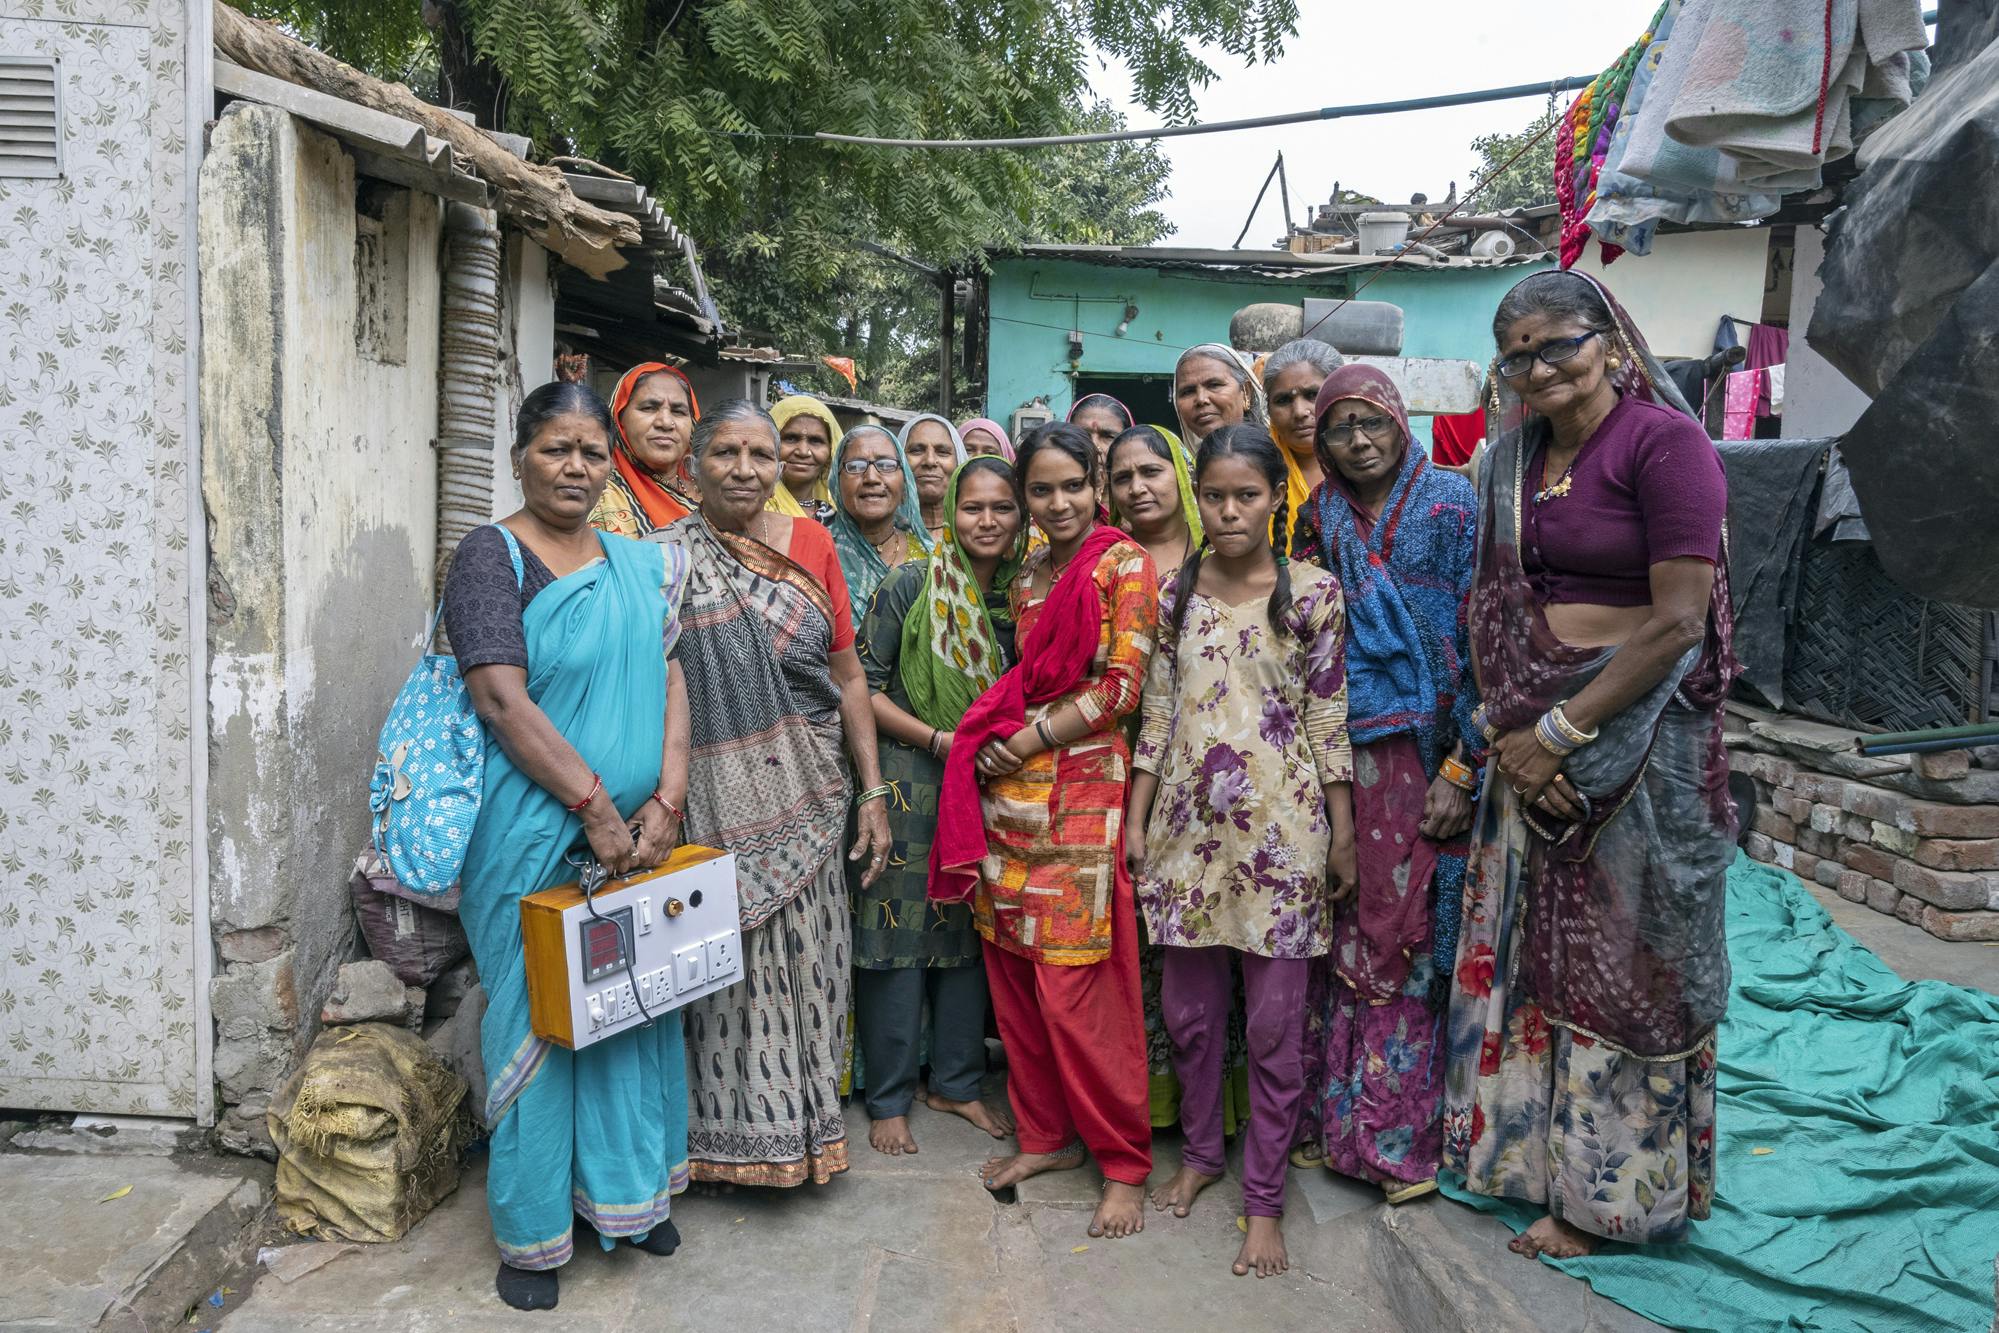 In Ahmedabad, women act to make slums climate-resilient, one house at a